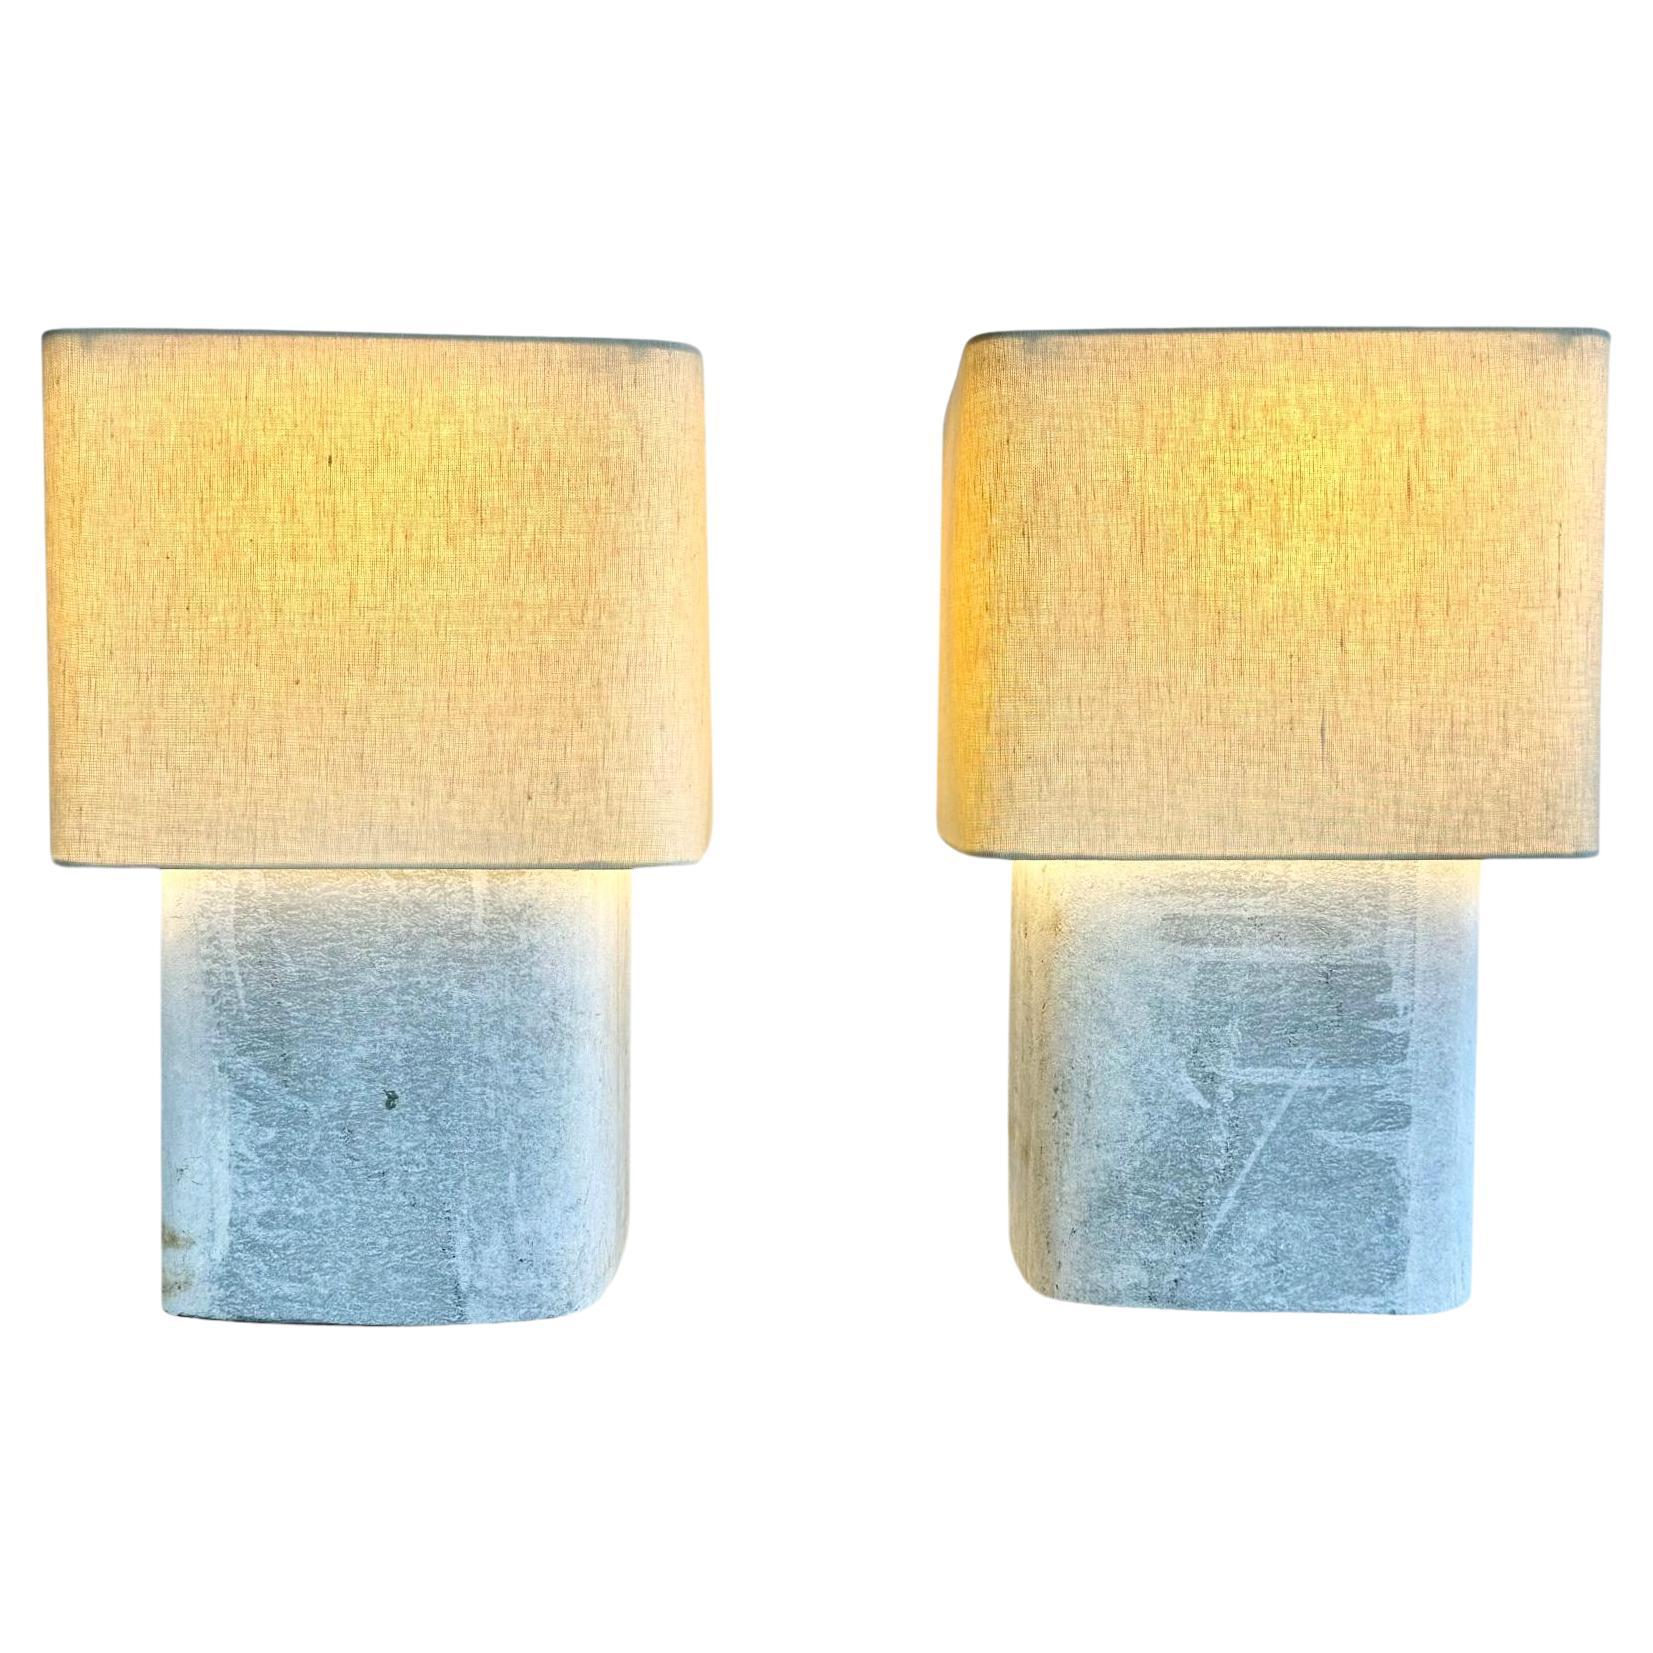 Pair of Willy Guhl Concrete Table Lamps, 1960s Switzerland For Sale